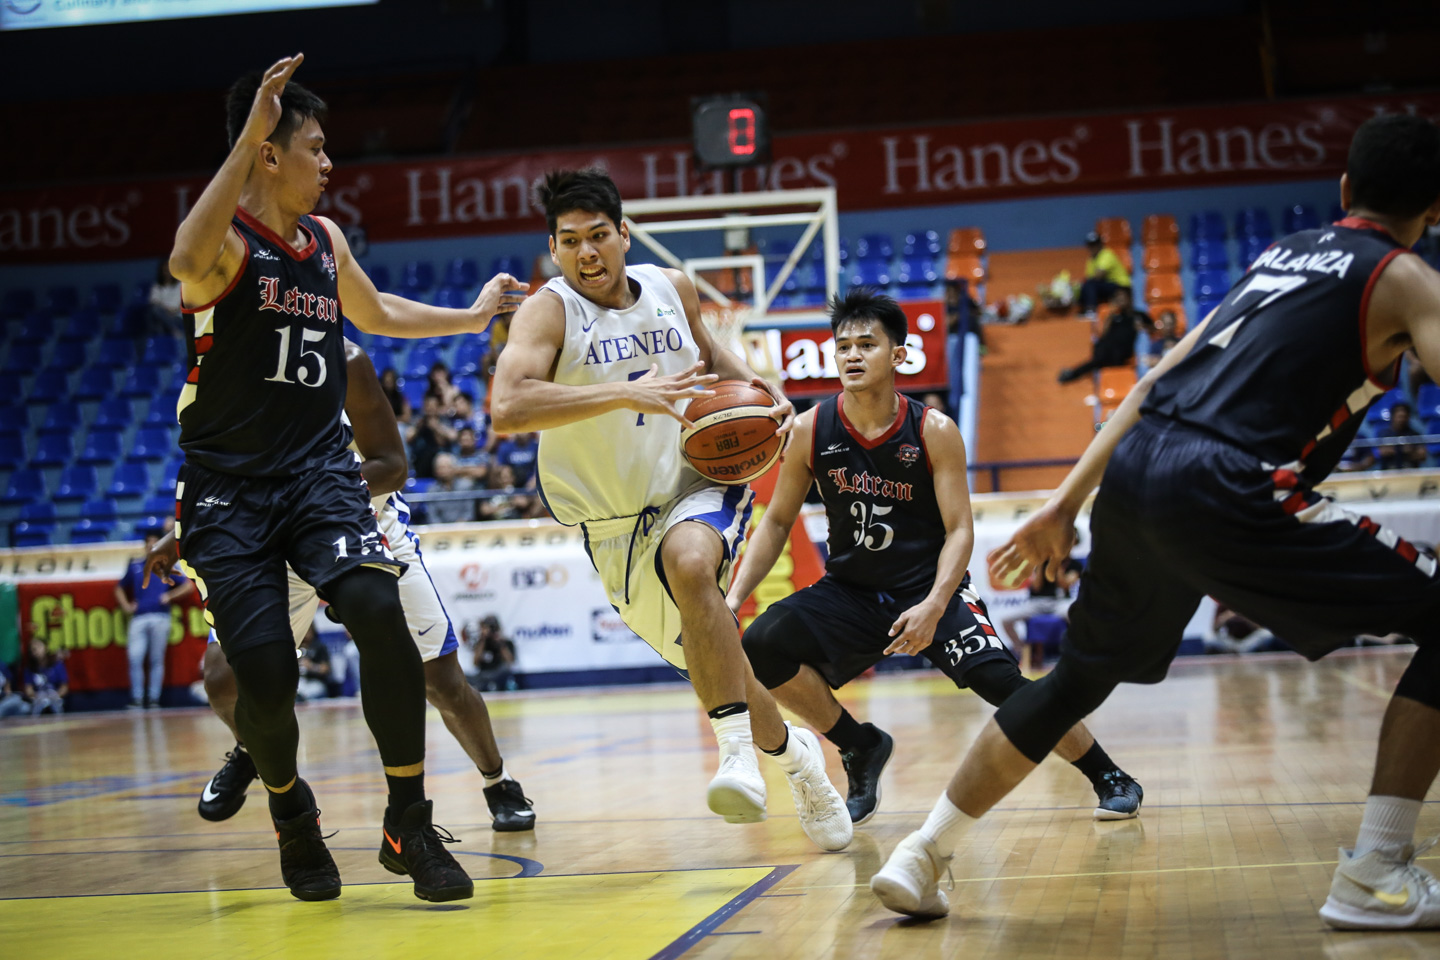 TWINS STAR. Mike Nieto (center) drops 9 points, the same output as his twin brother Matt, to lead Ateneo's balanced charge. Photo by Josh Albelda/Rappler  